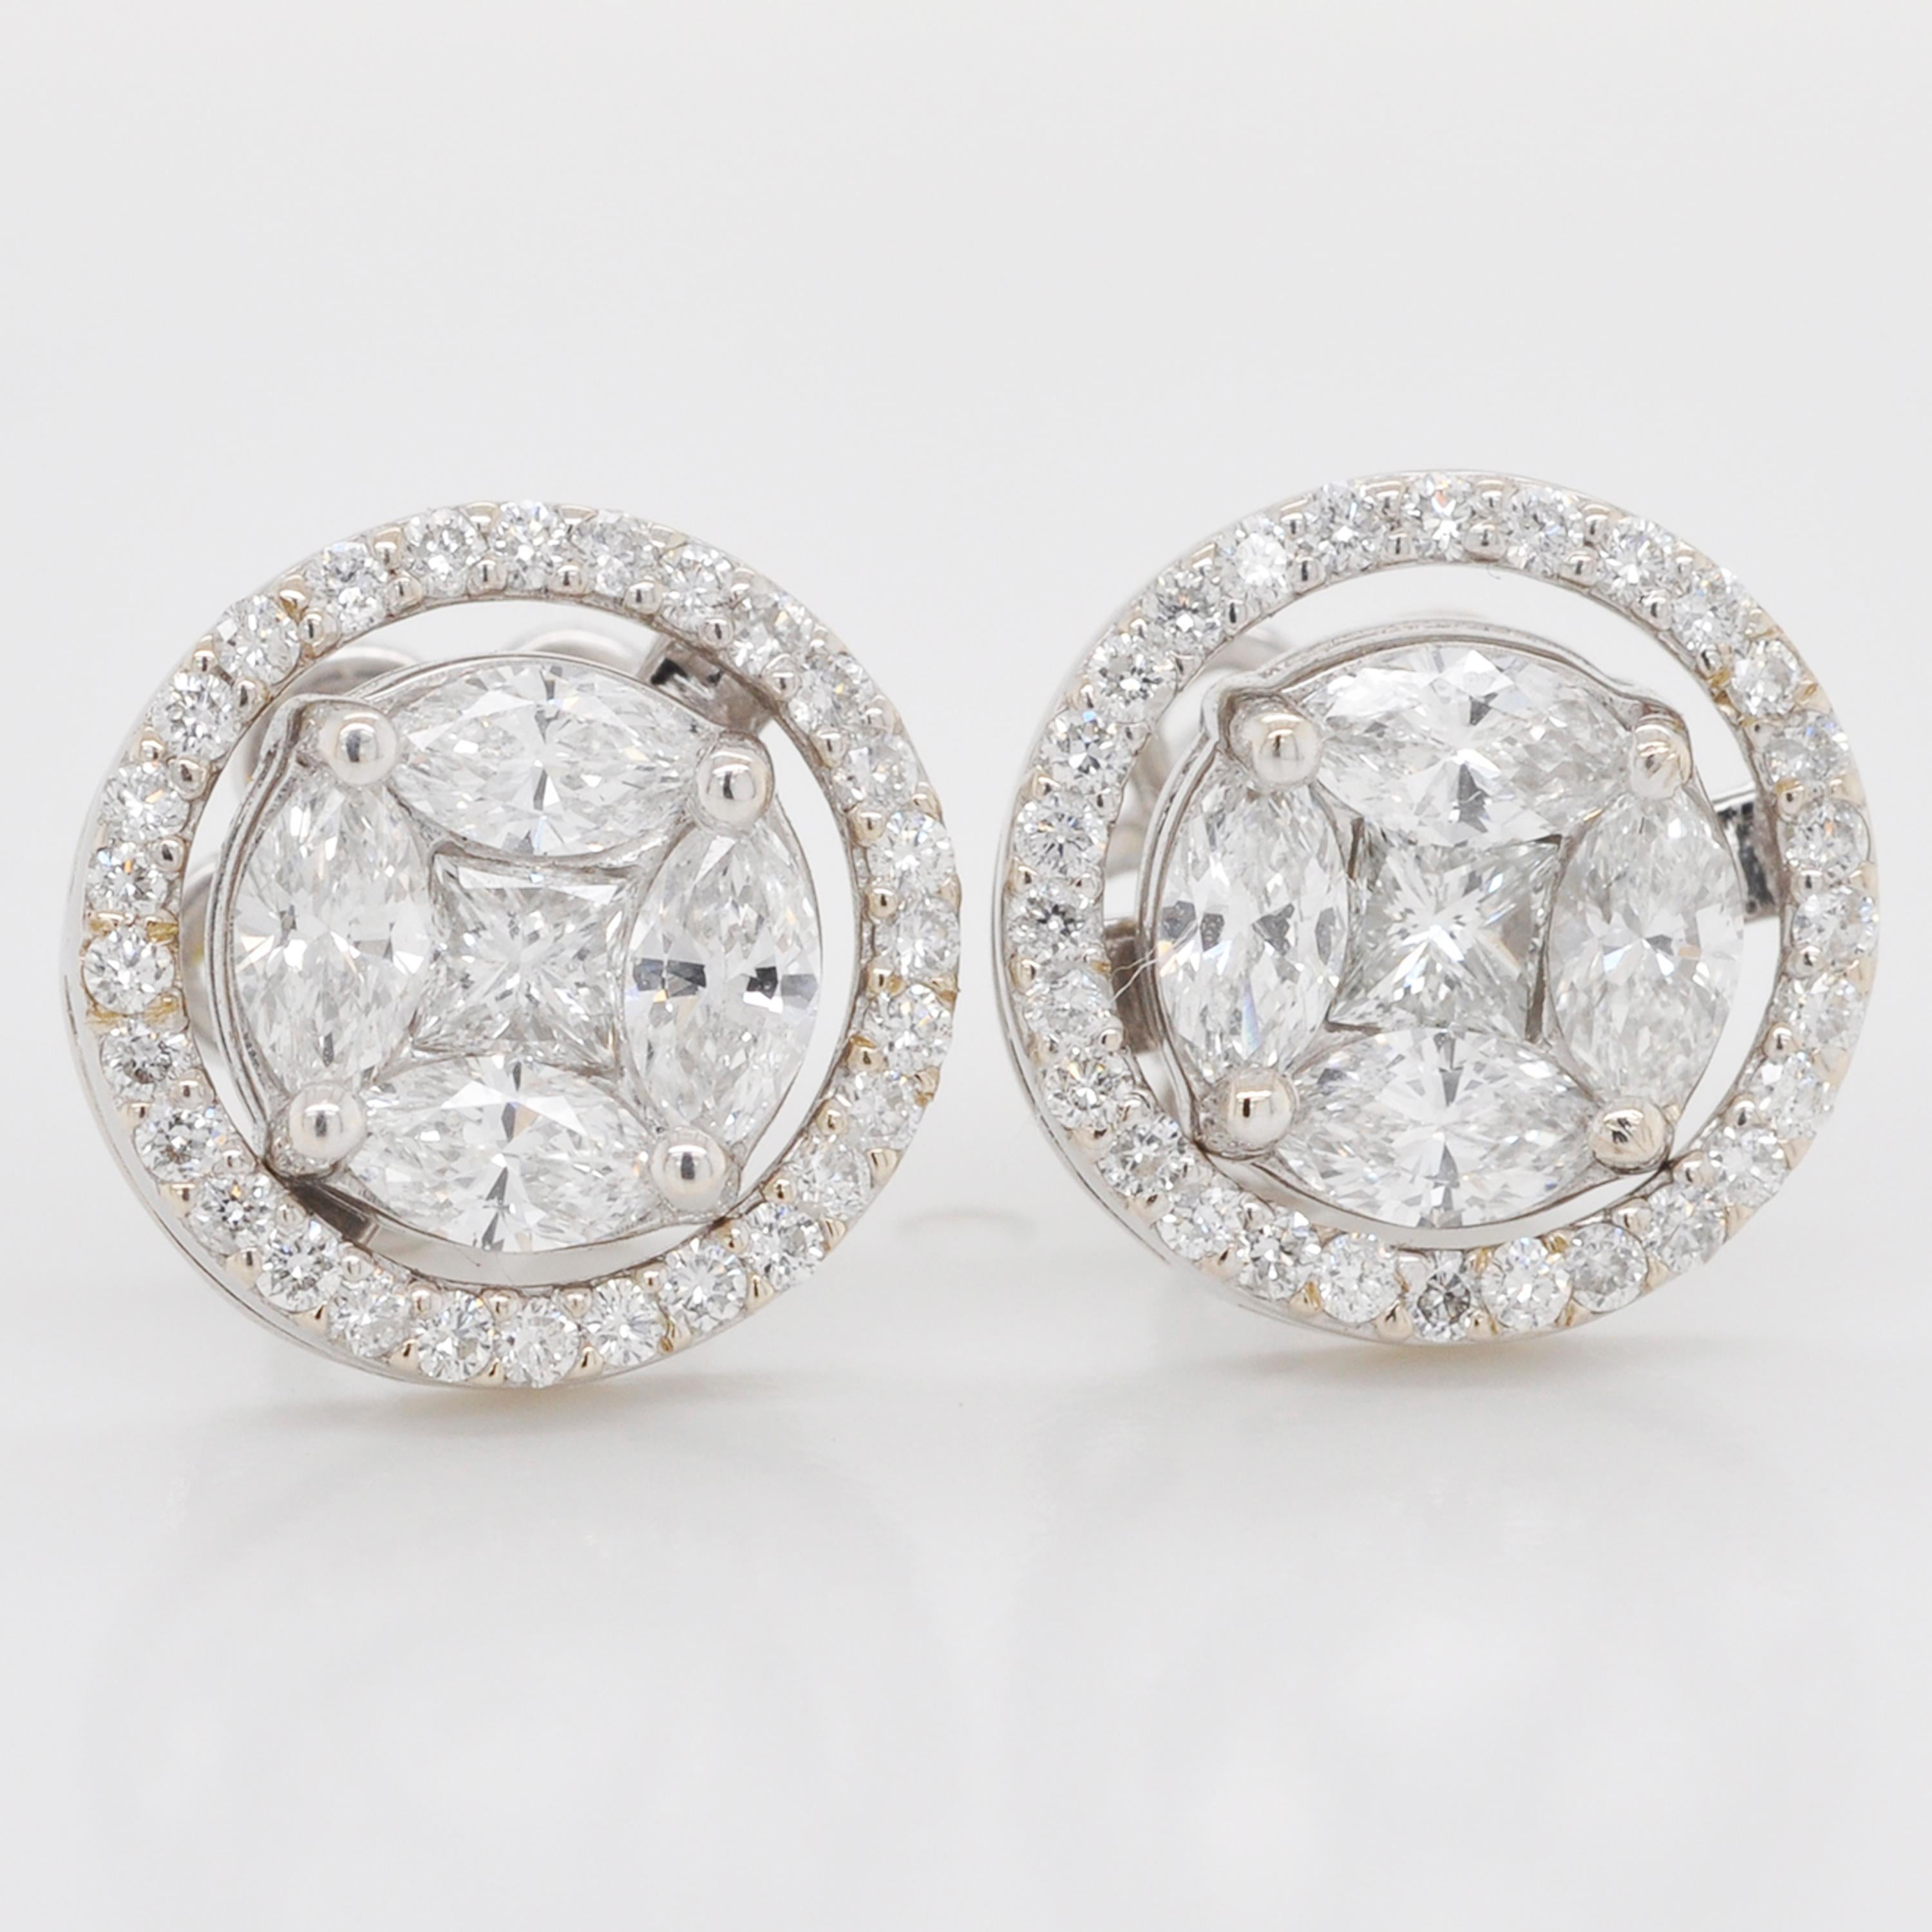 Detachable Solitaire Look Pressure Set Diamond Stud Earrings 18 Karat White Gold In New Condition For Sale In Jaipur, Rajasthan